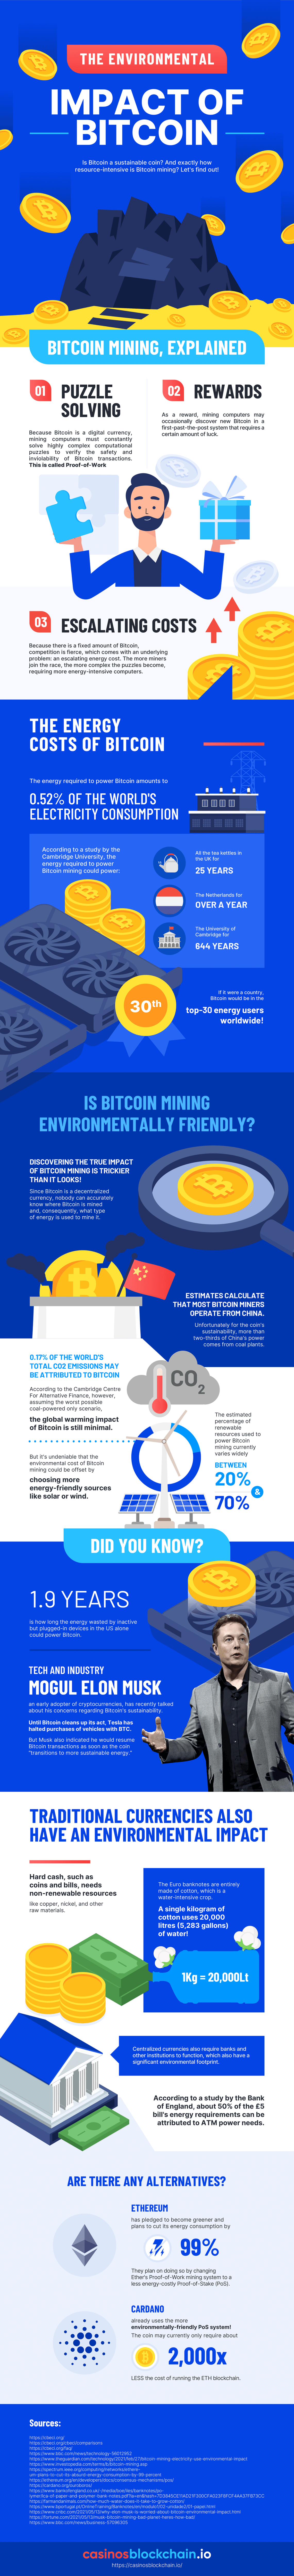 Infographic about the environmental impact of Bitcoin